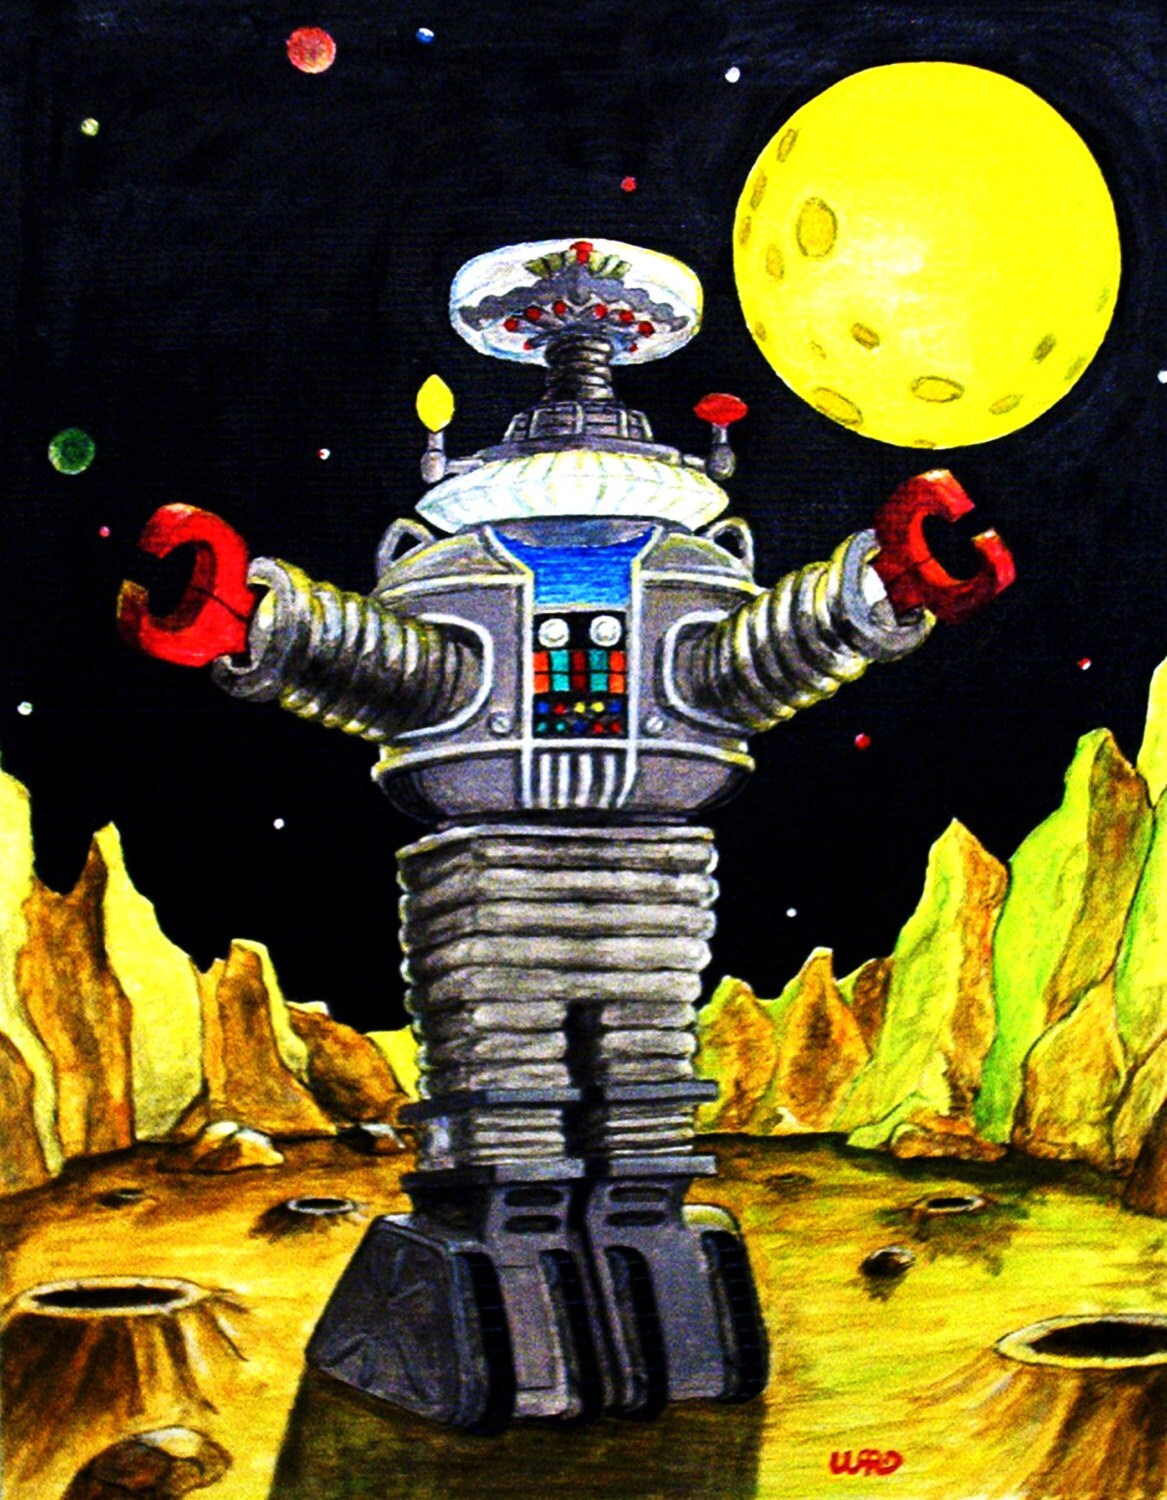 Lost In Space Robot Art.